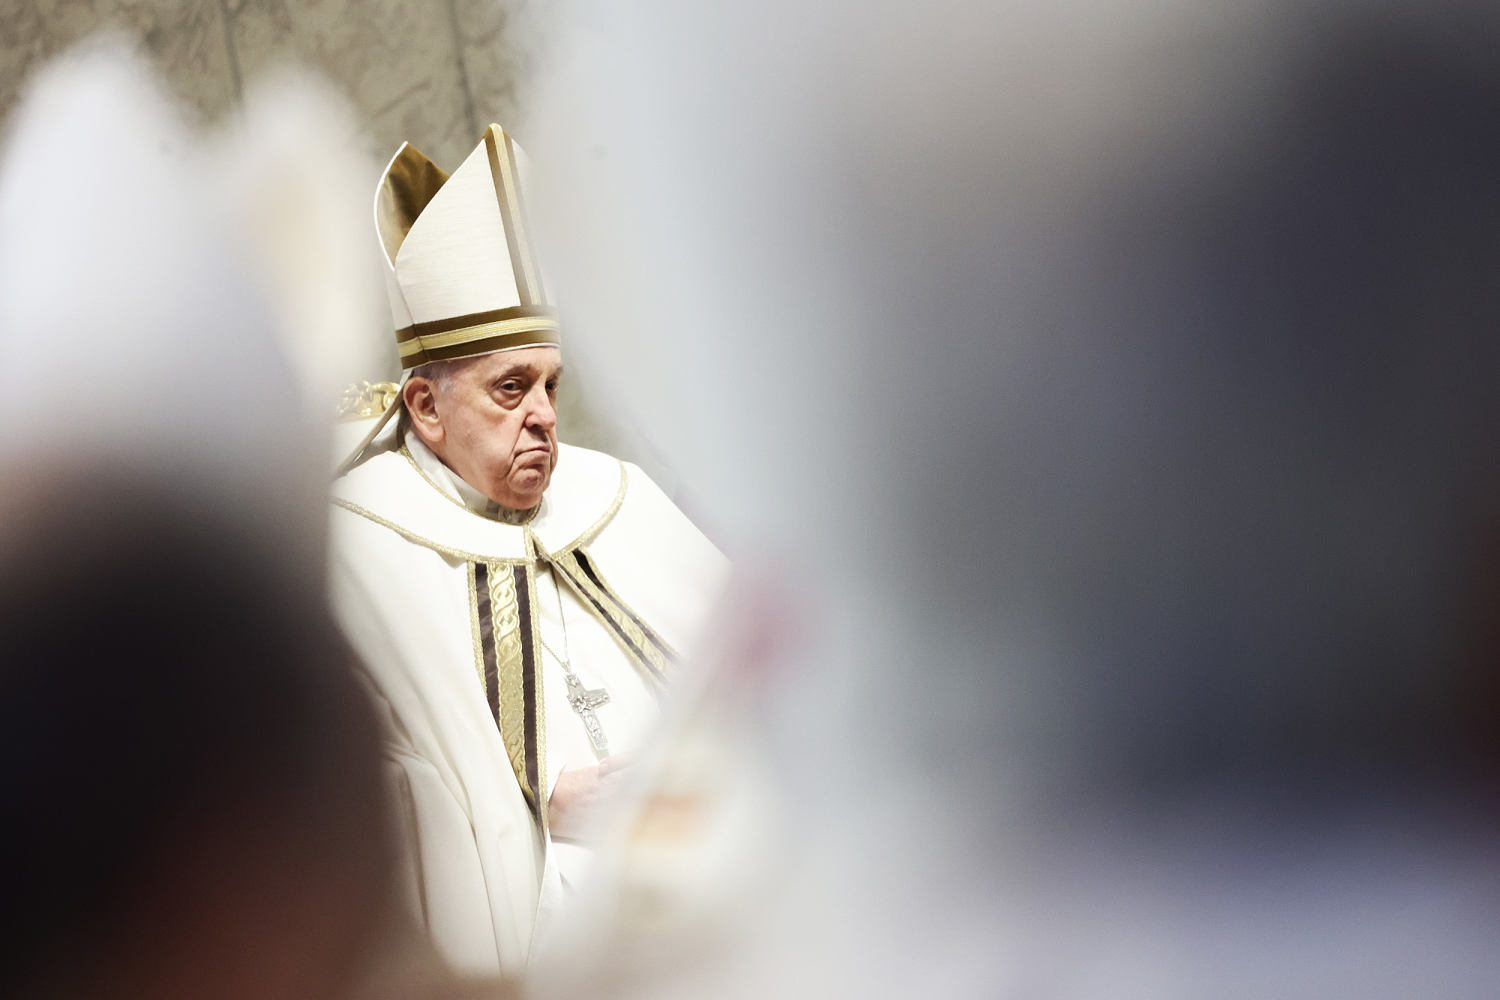 Pope, looking strong, issues lengthy marching orders to priests during Holy Thursday Mass